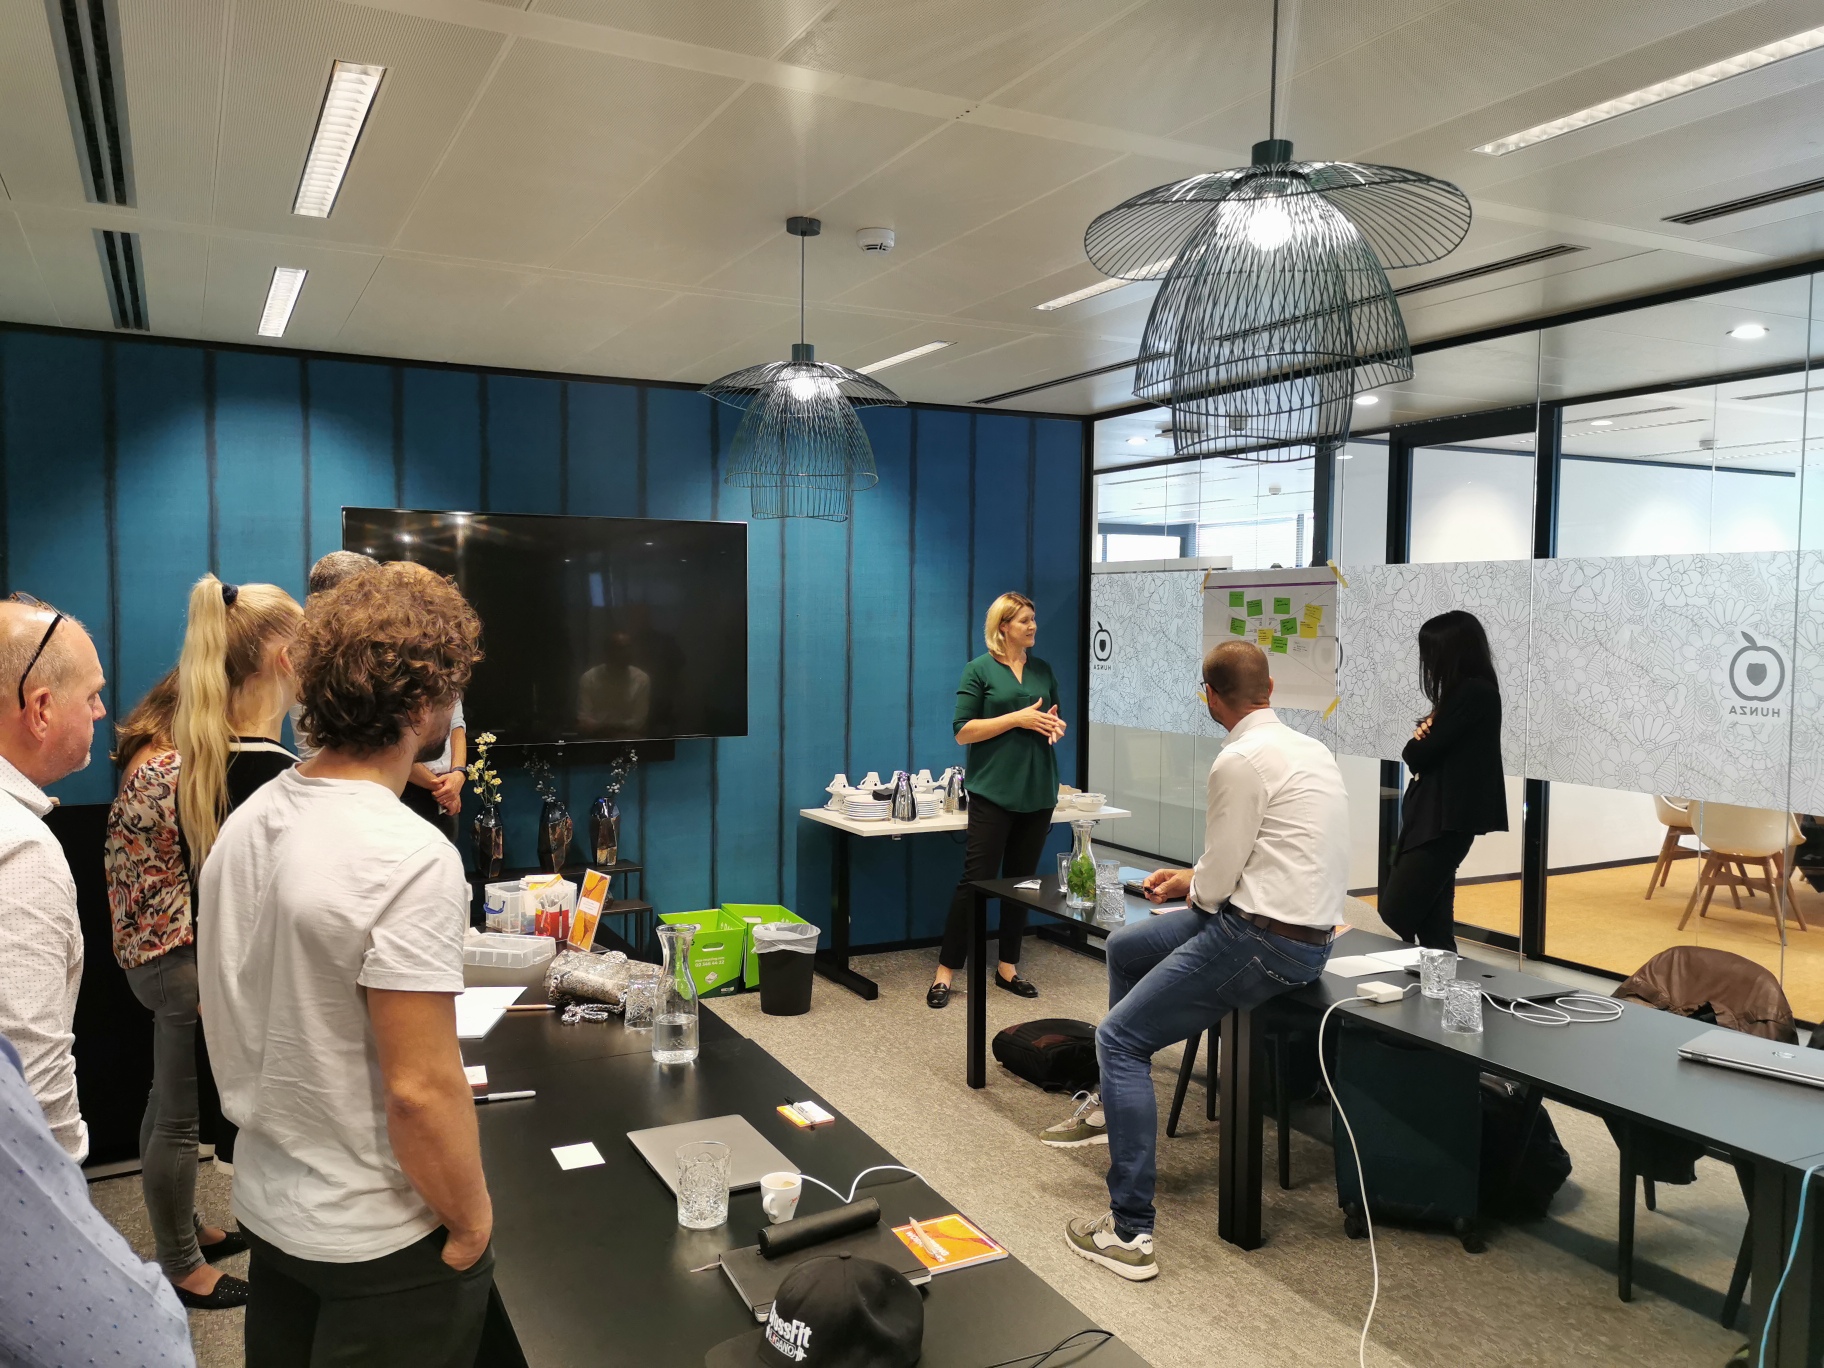 CREATE during Lean Start-up Academy elaborated its business approach